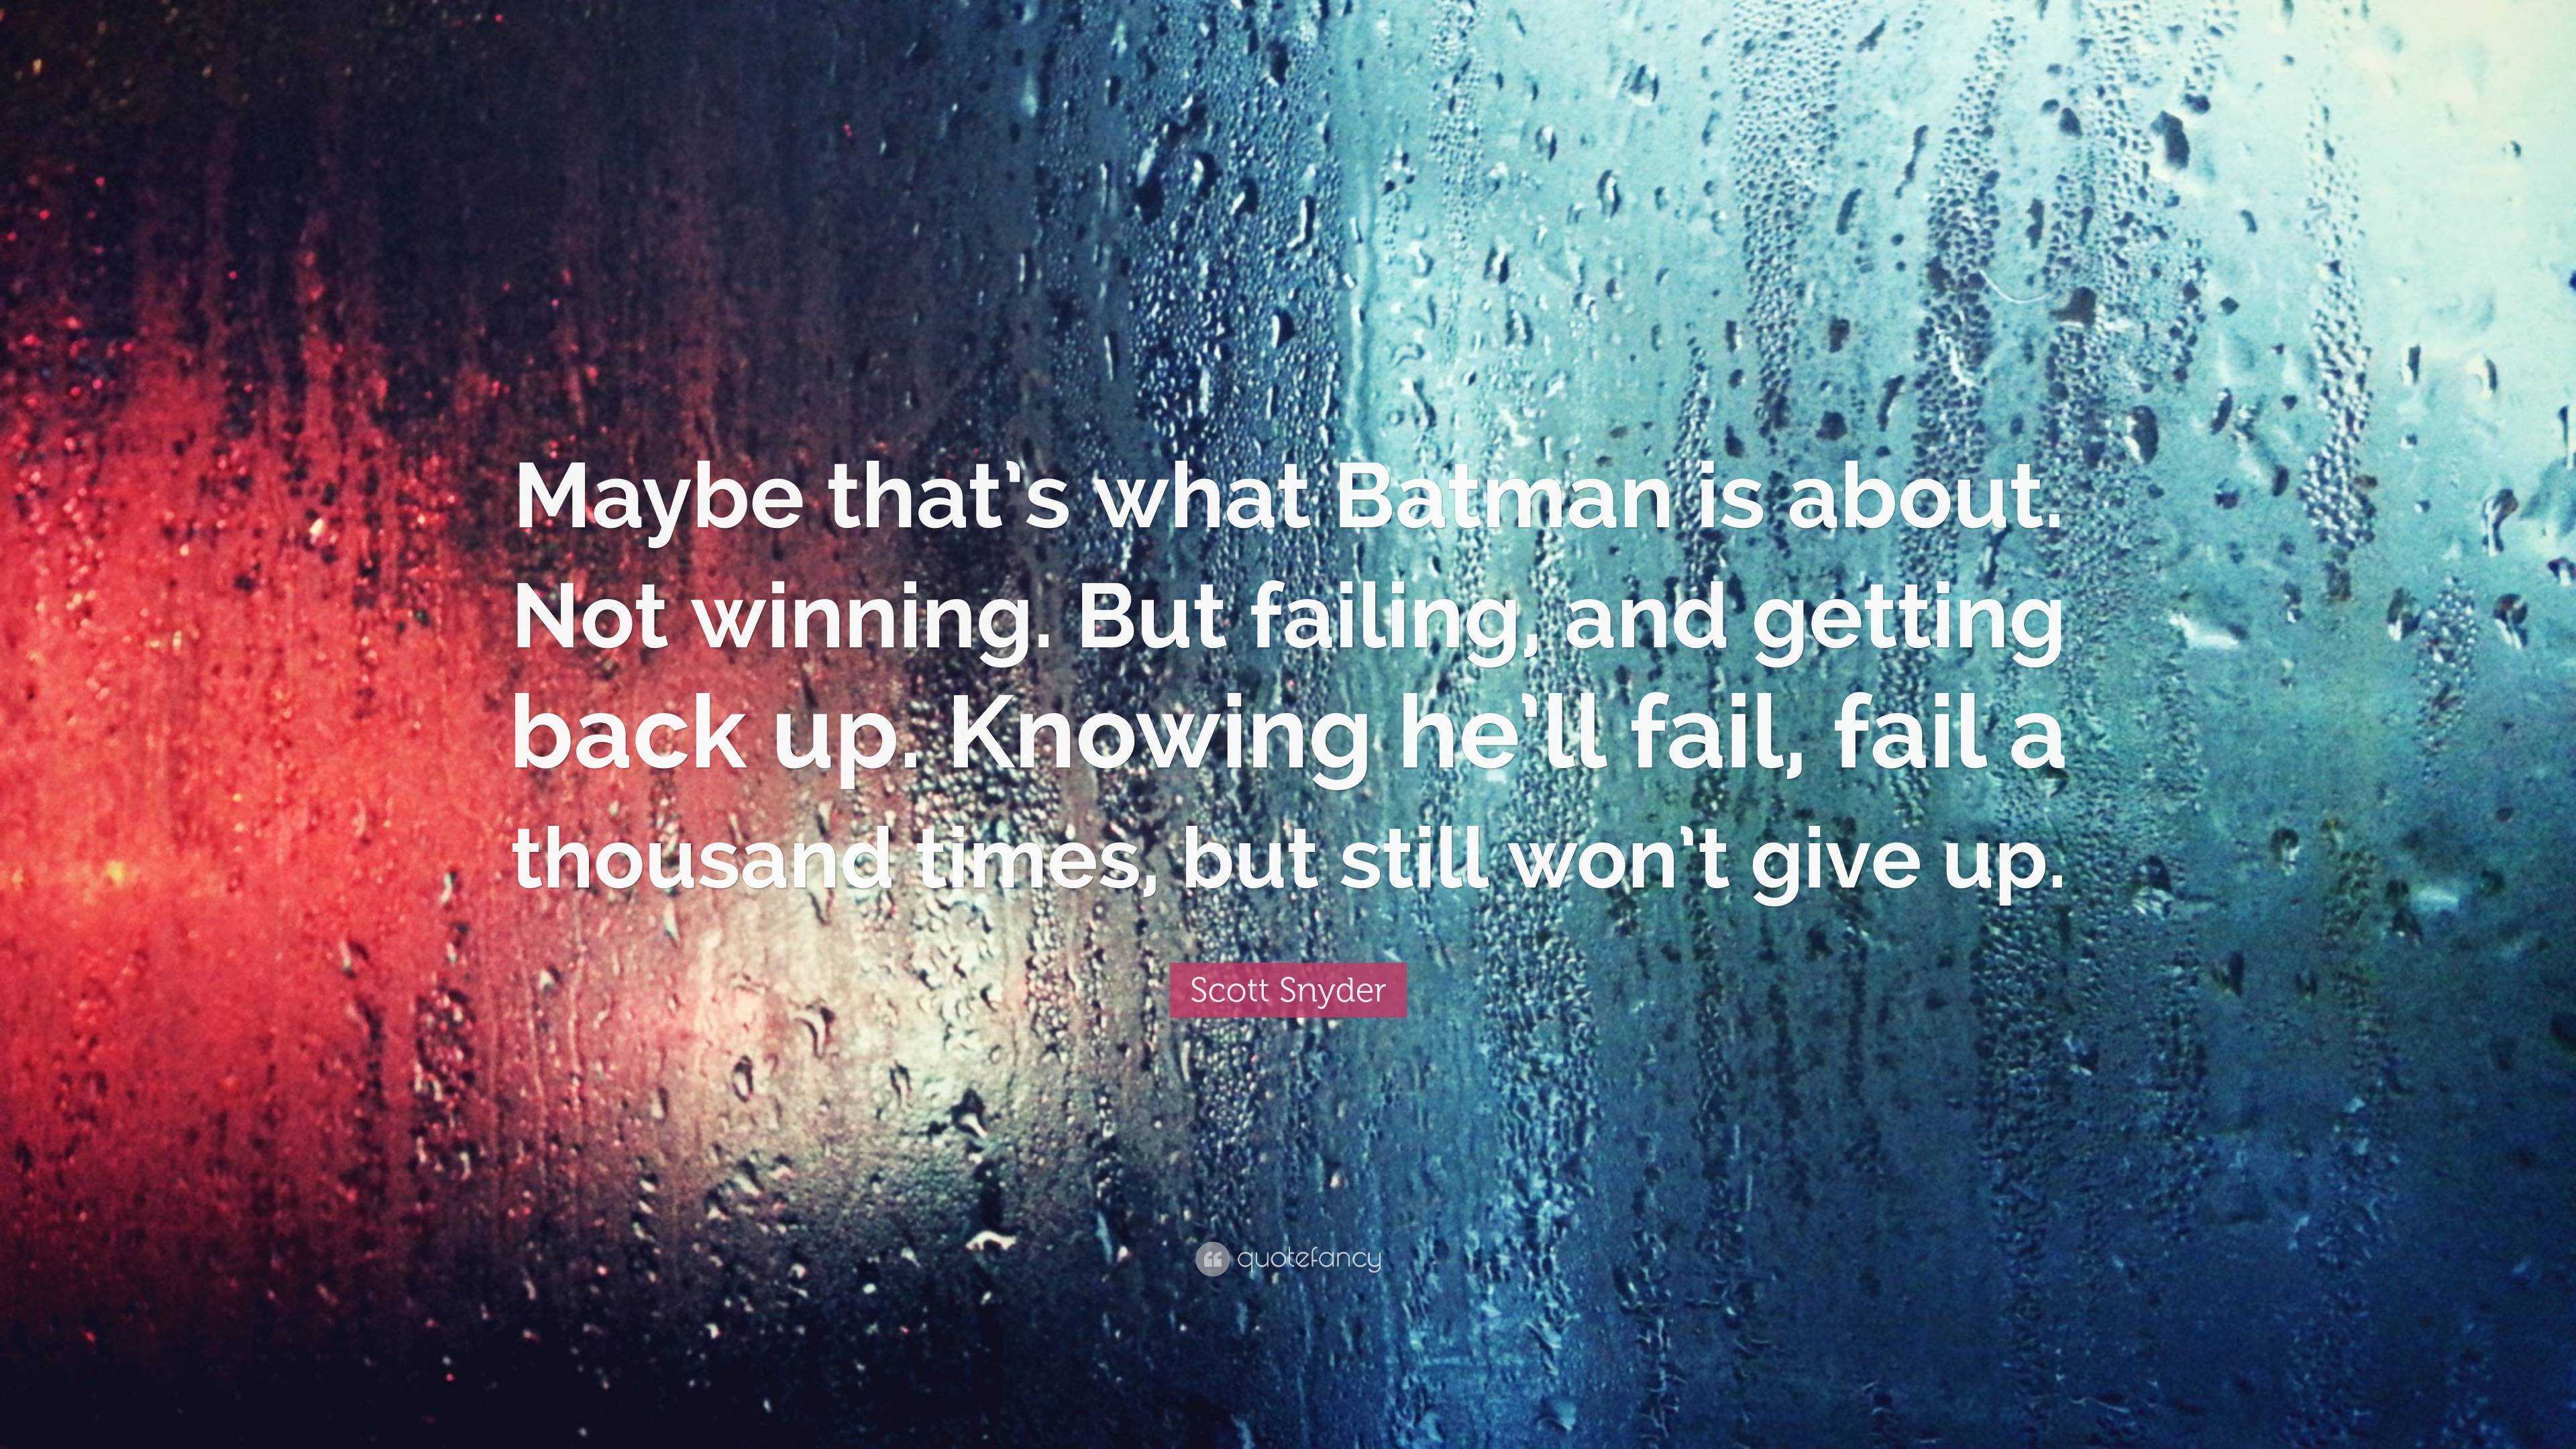 Scott Snyder Quote: “Maybe that's what Batman is about. Not winning. But  failing, and getting back up. Knowing he'll fail, fail a thousand ti...”